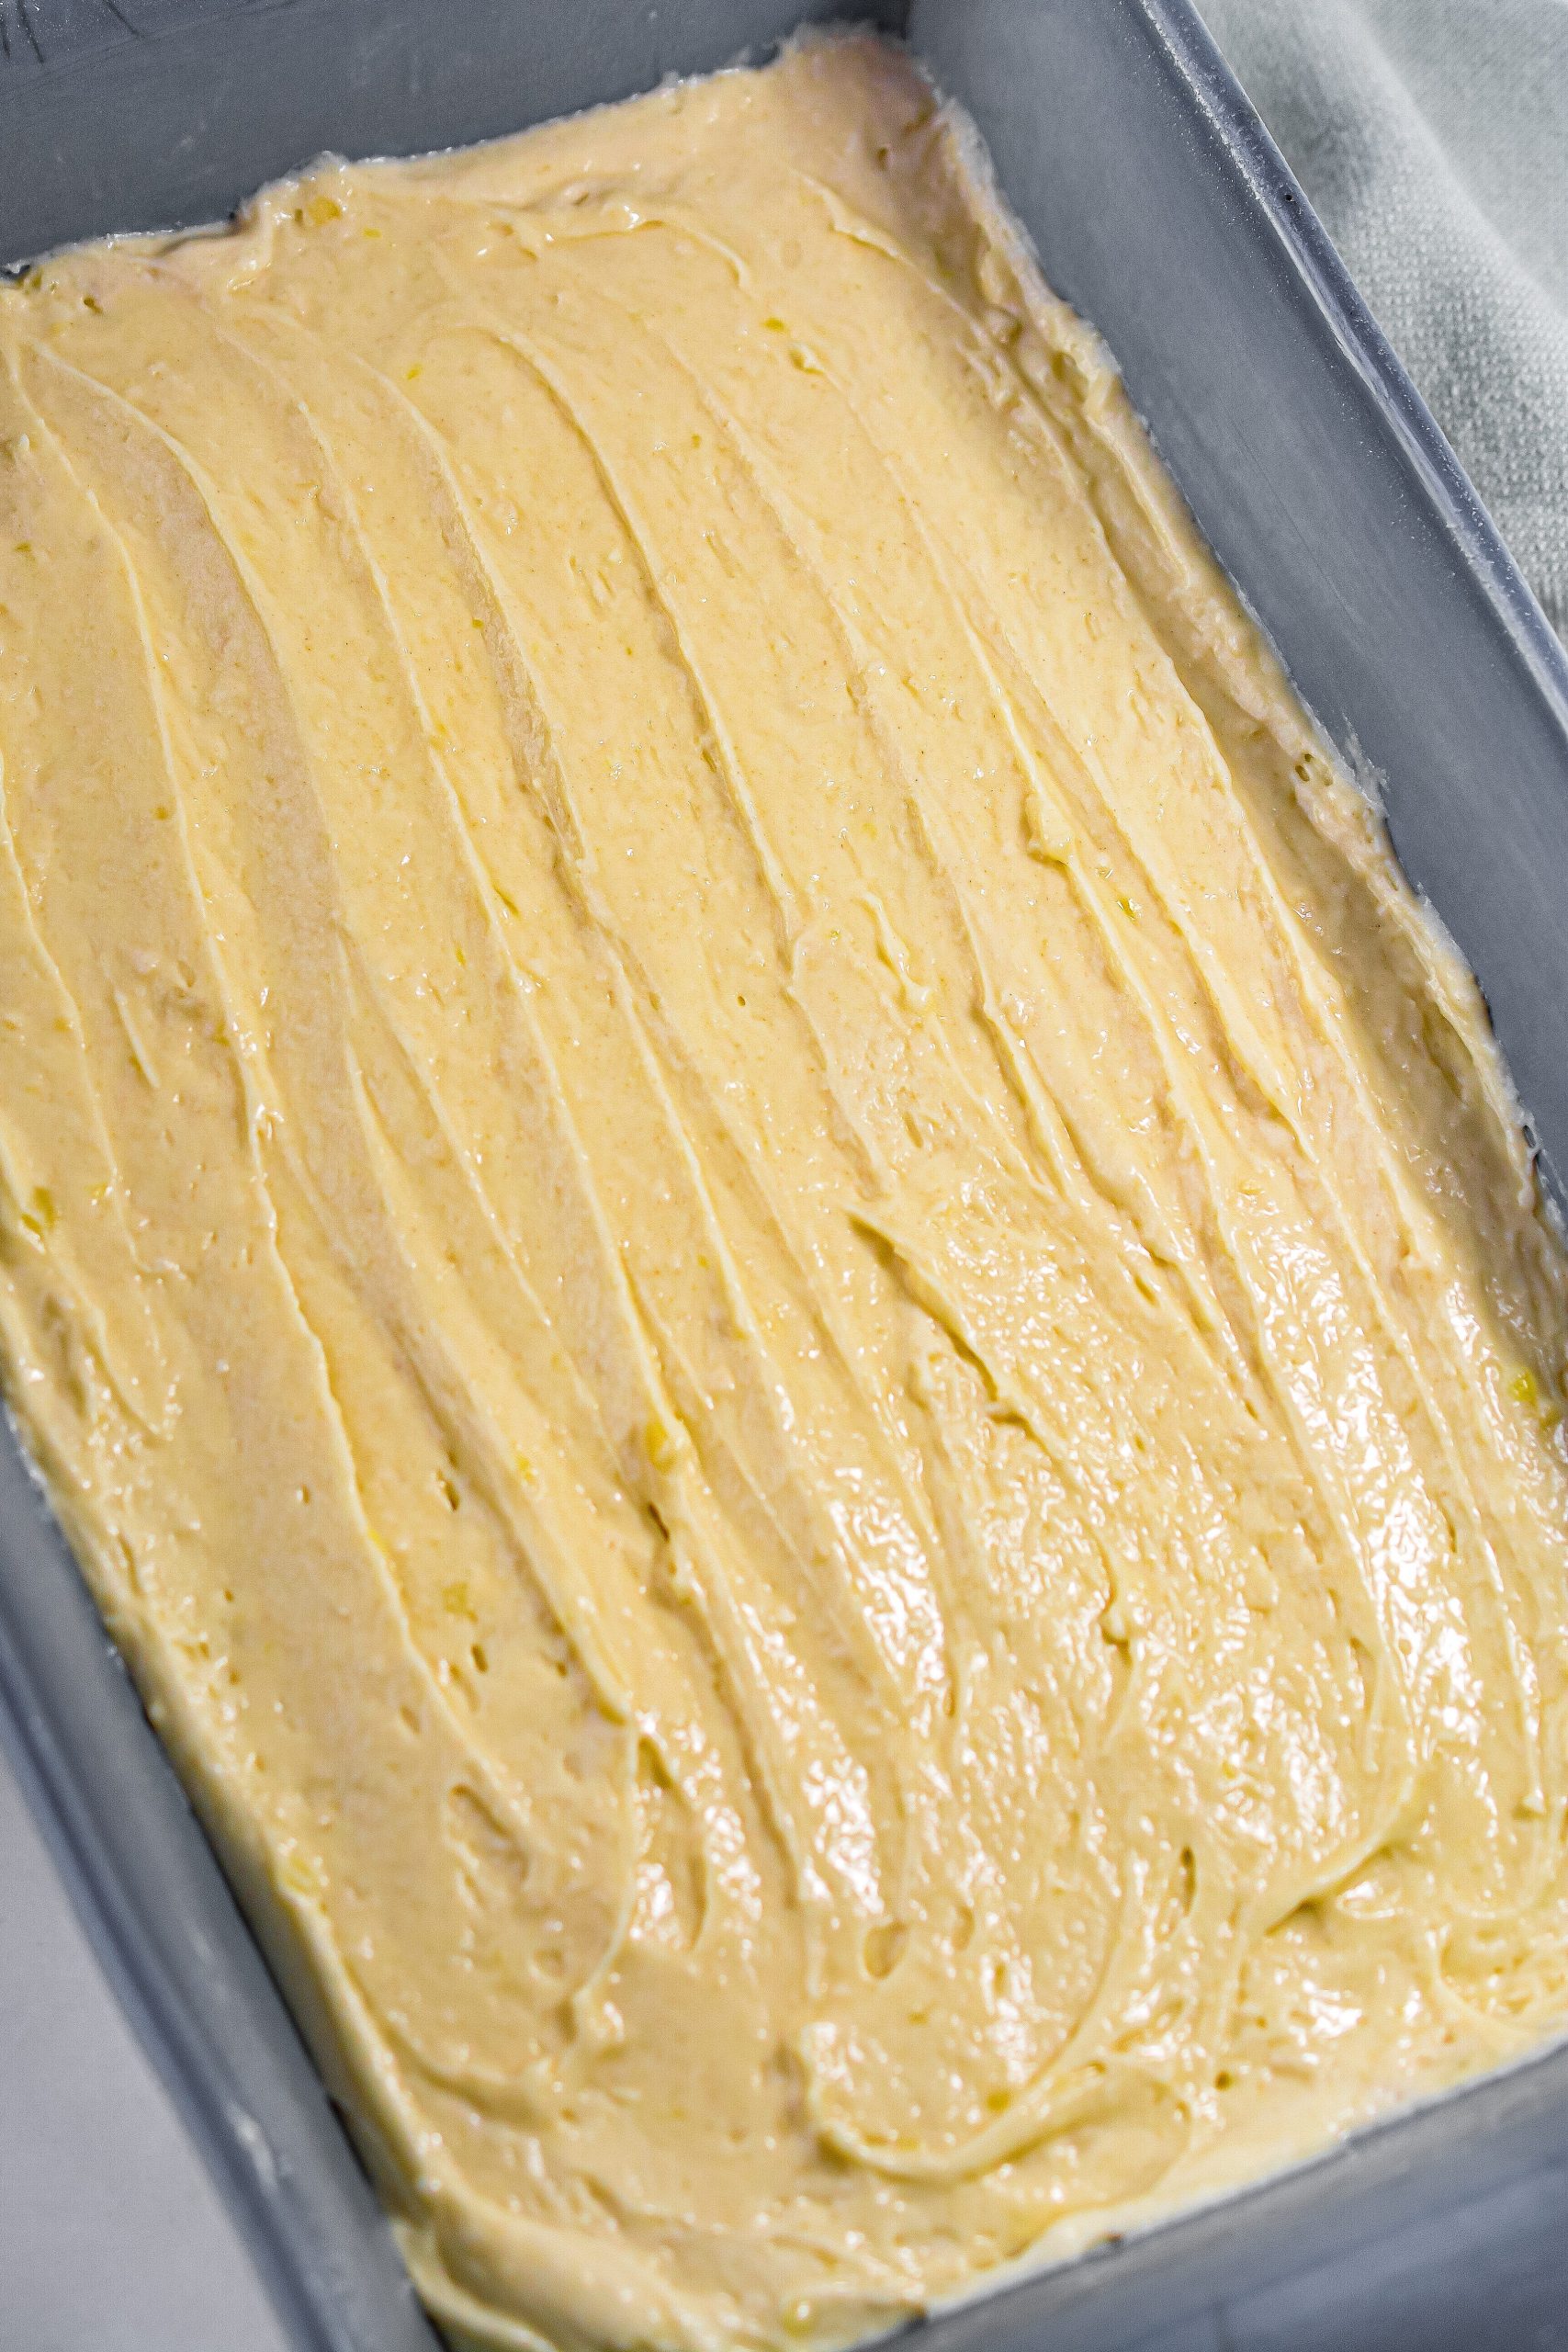 add it in a smooth layer to a well-greased 9x13 baking dish